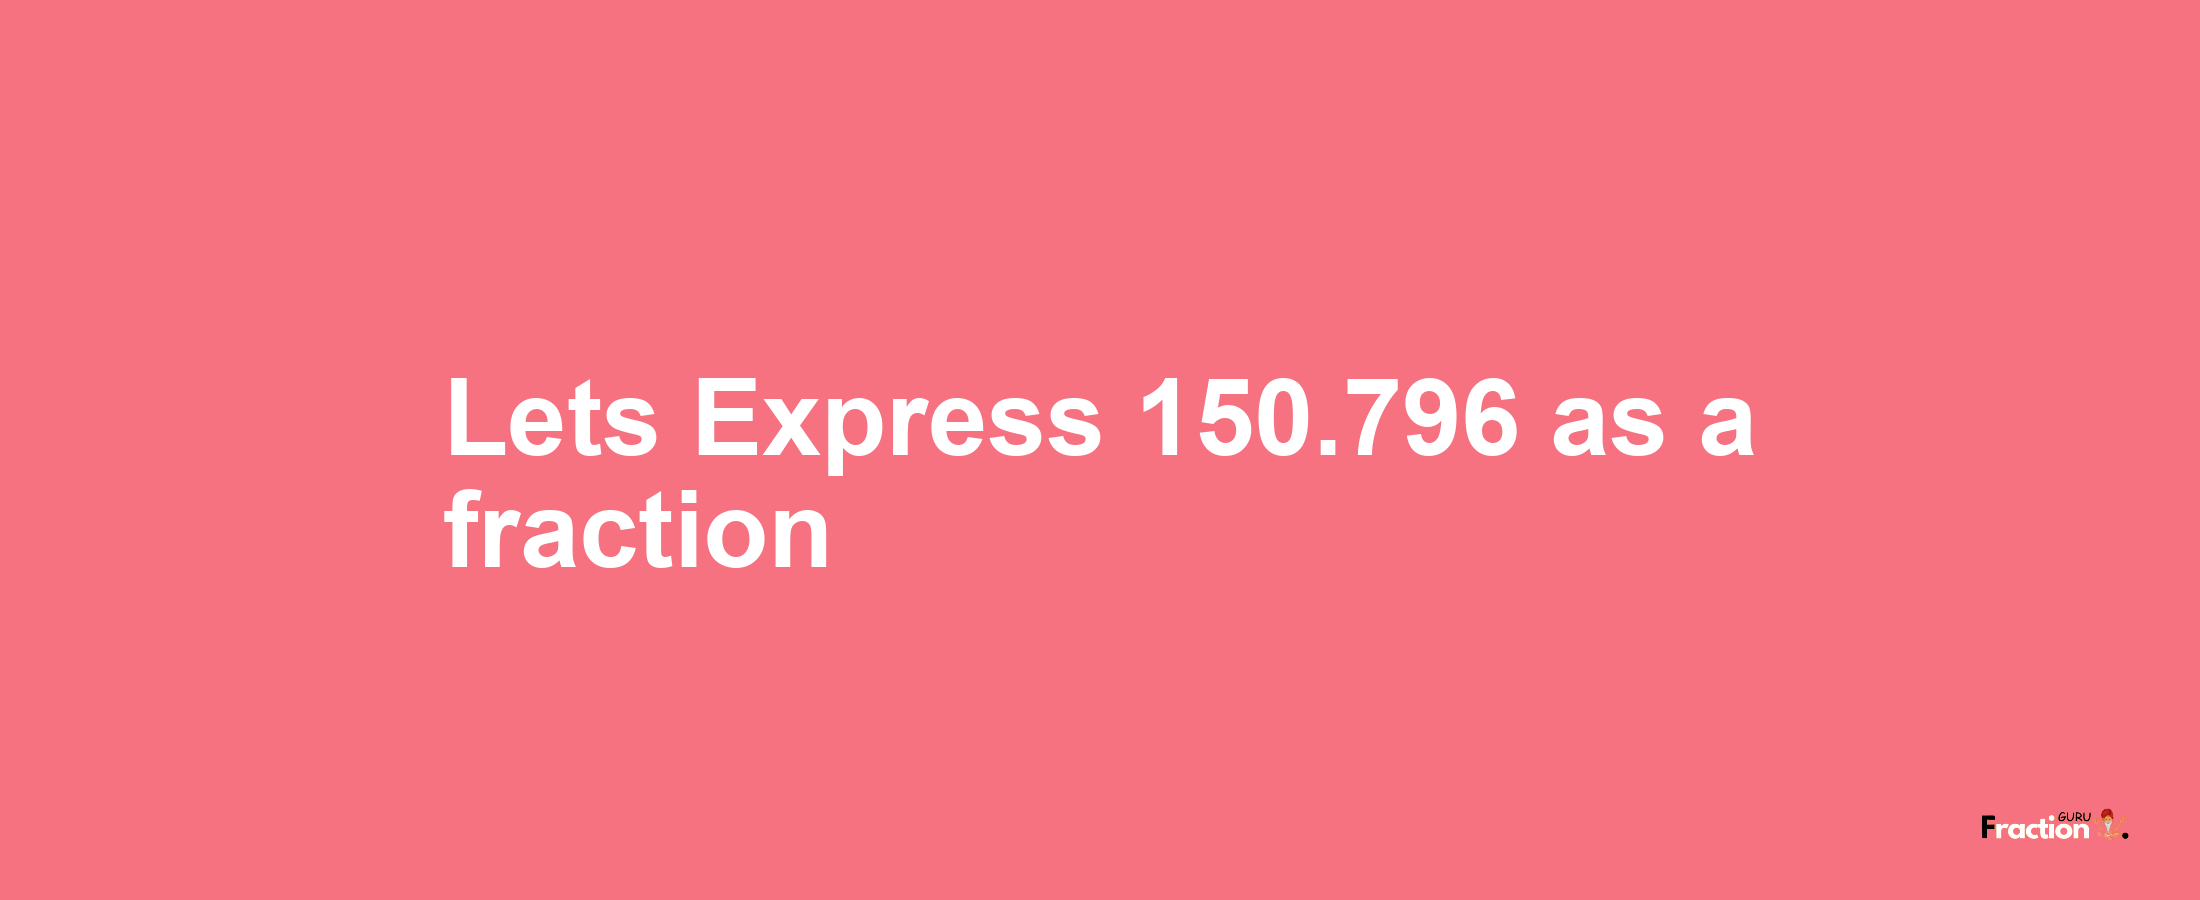 Lets Express 150.796 as afraction